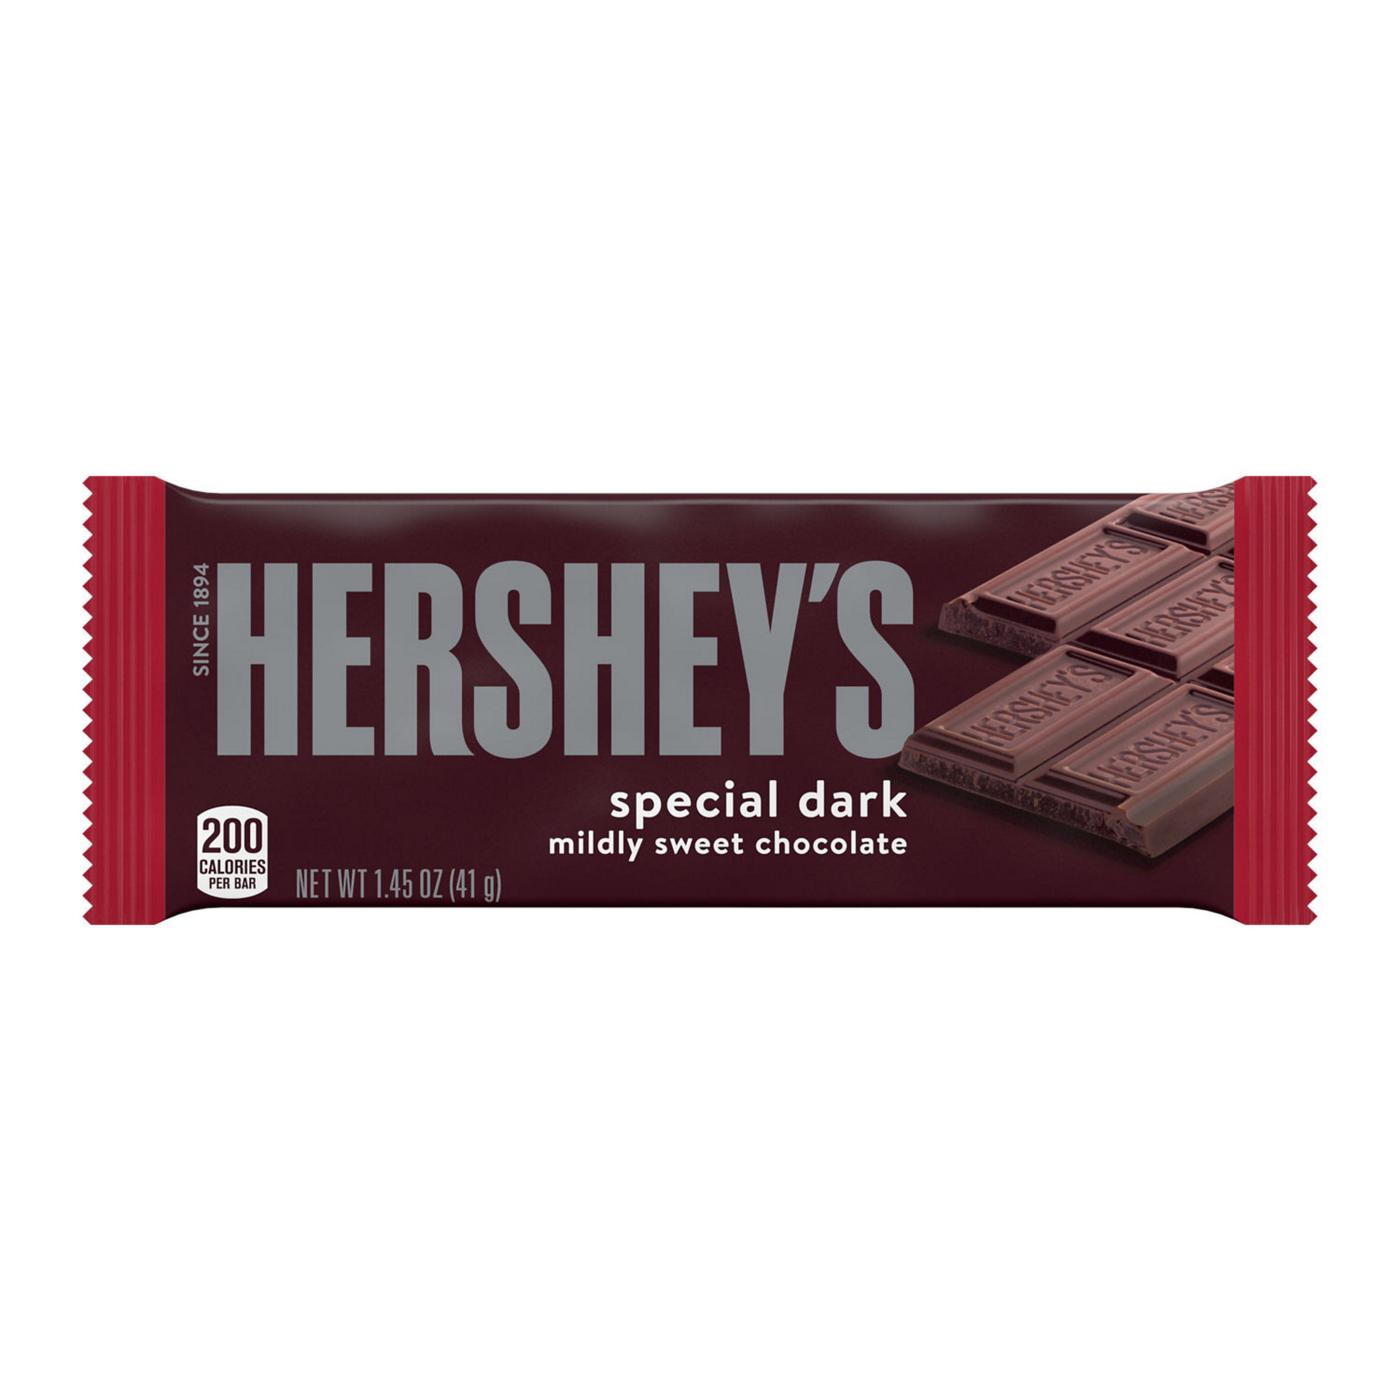 Hershey's Special Dark Mildly Sweet Chocolate Candy Bars; image 6 of 7